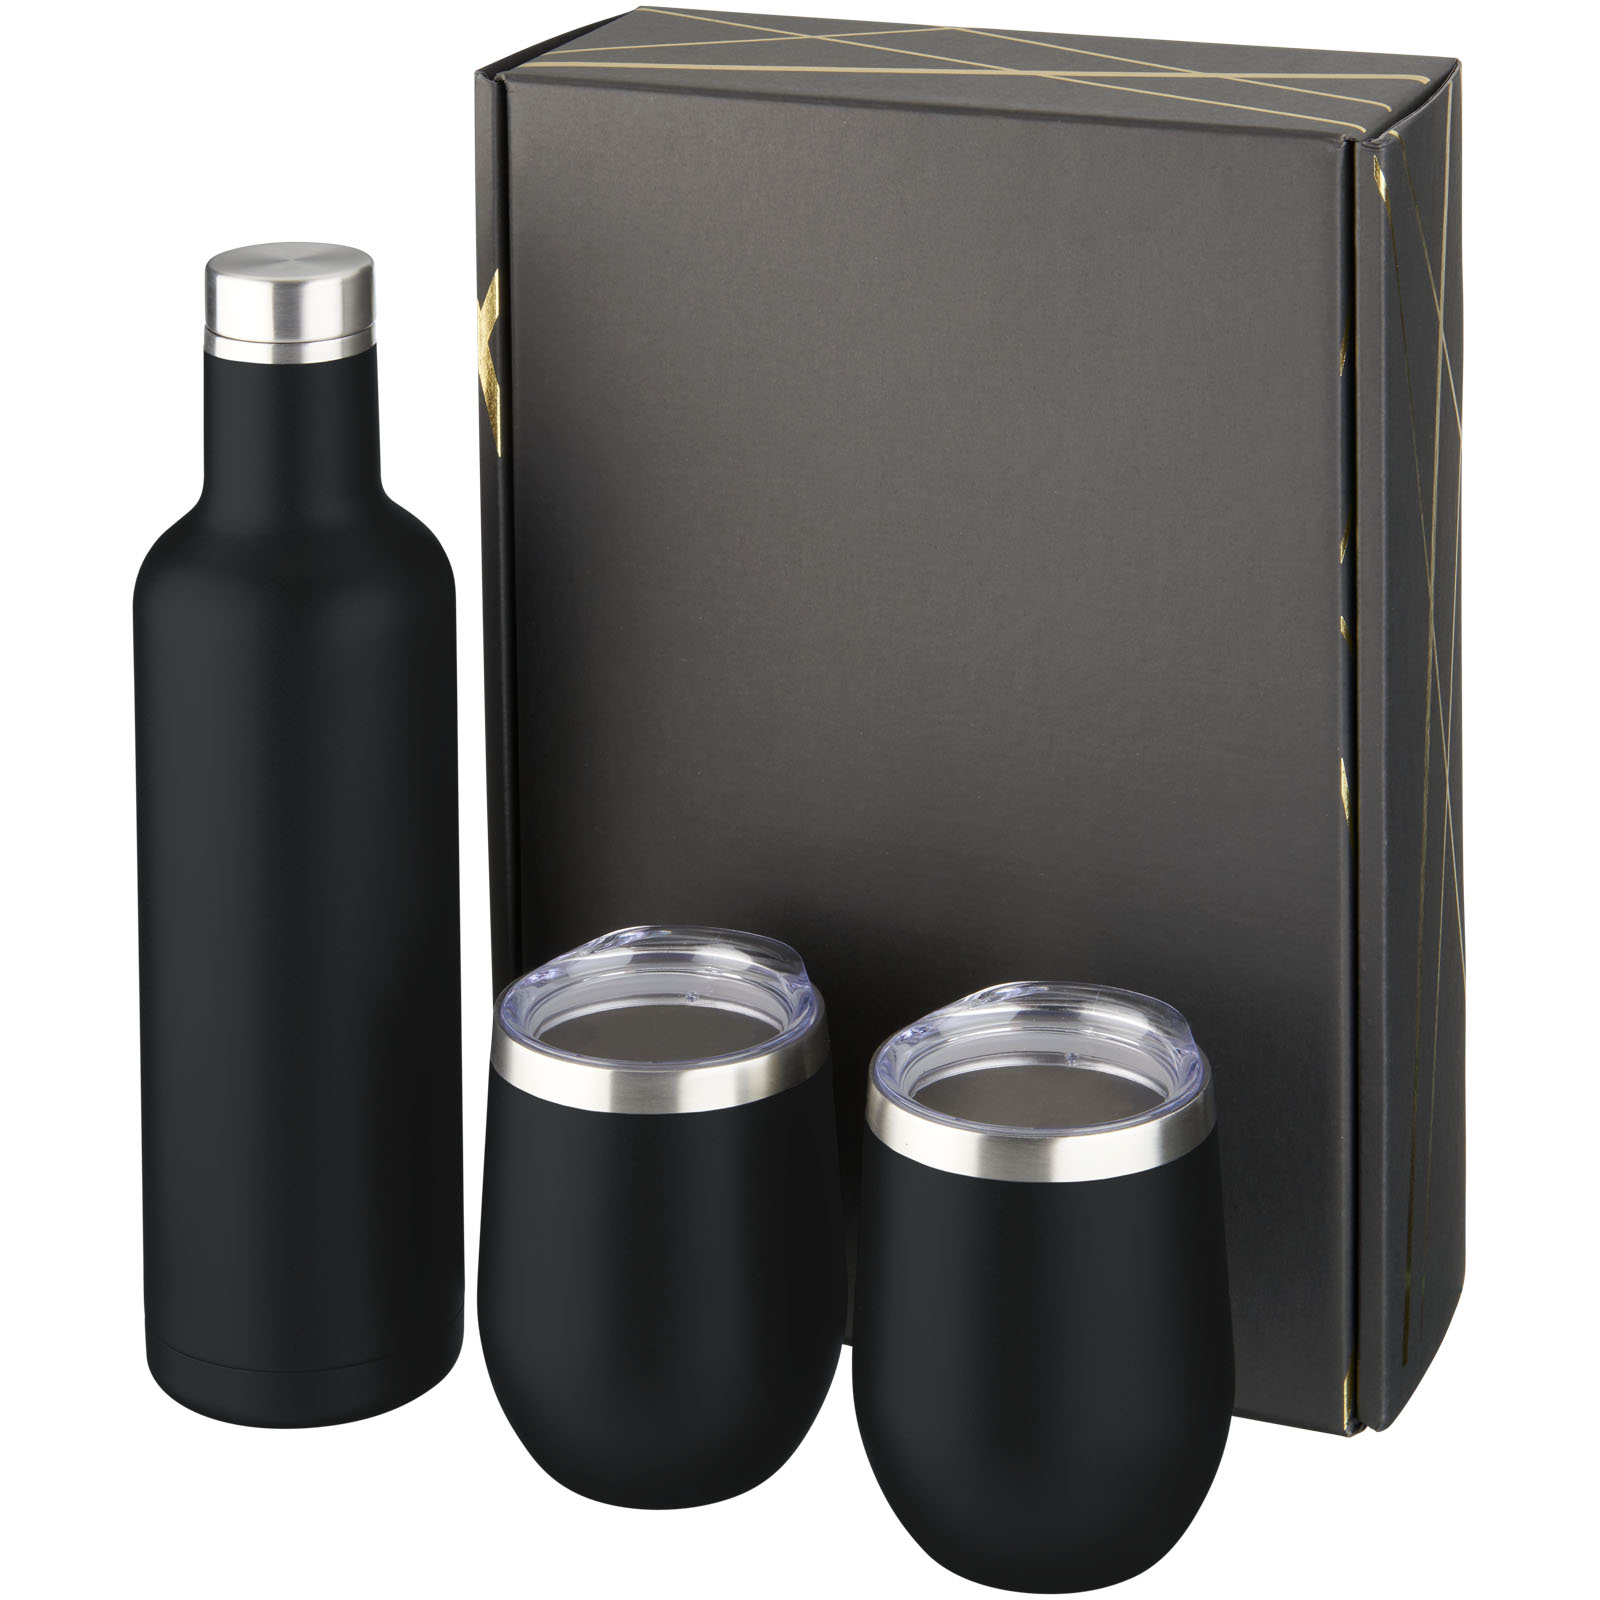 Copper Vacuum Insulated Bottle and Cup Gift Set - Chattisham - Nantwich